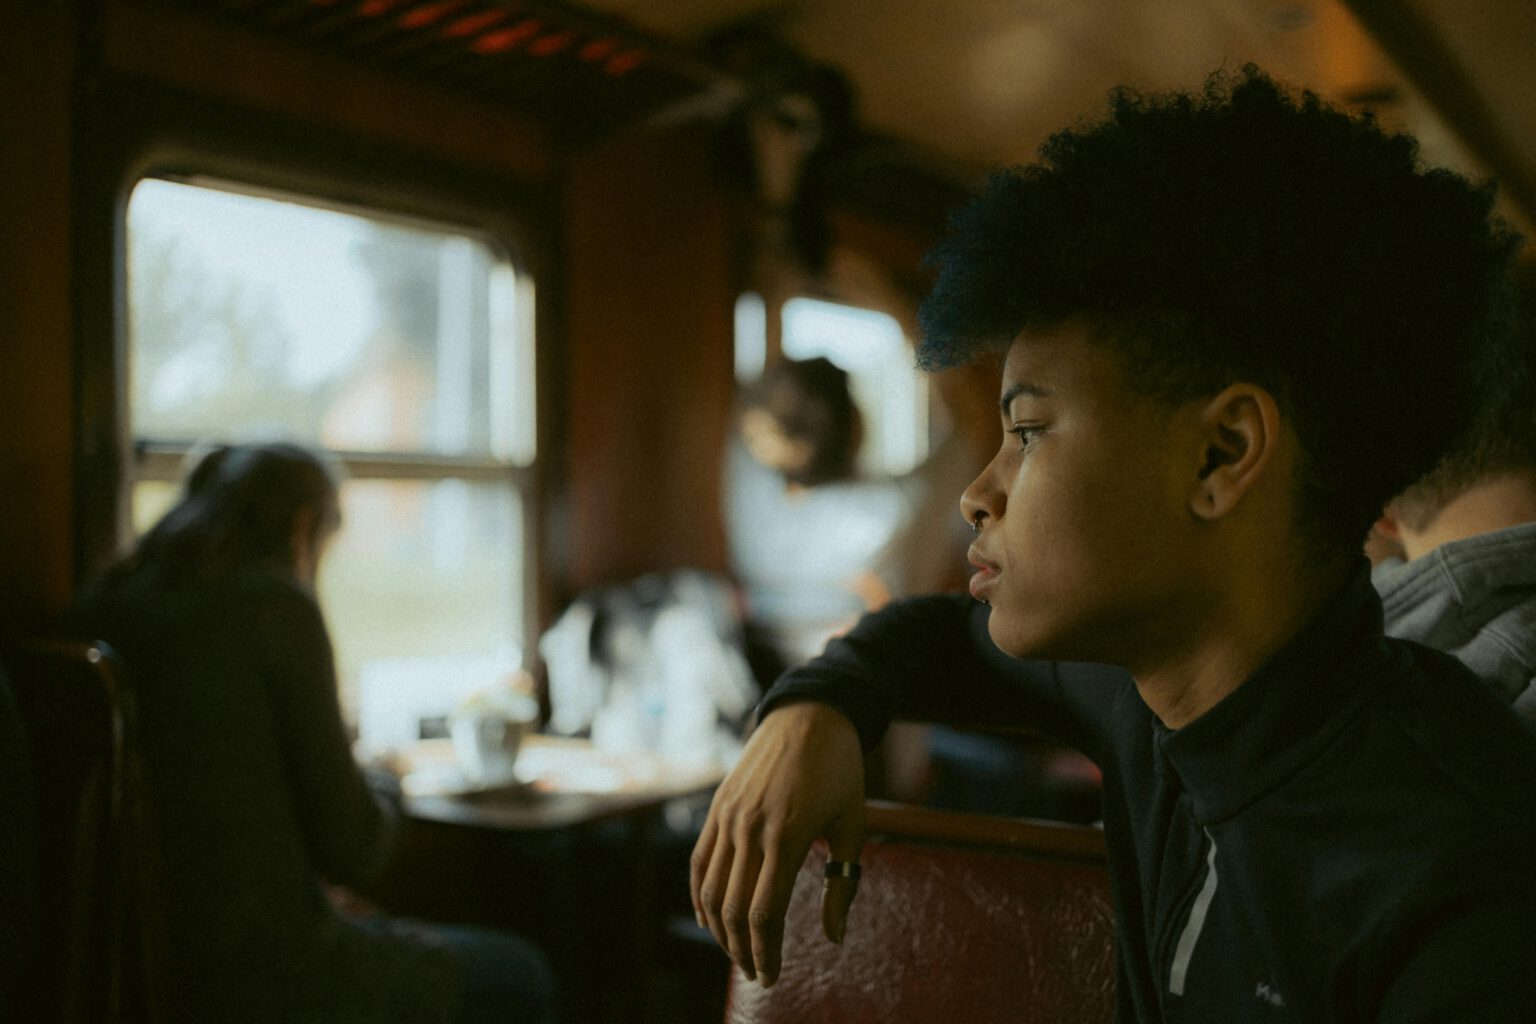 Young person on a train